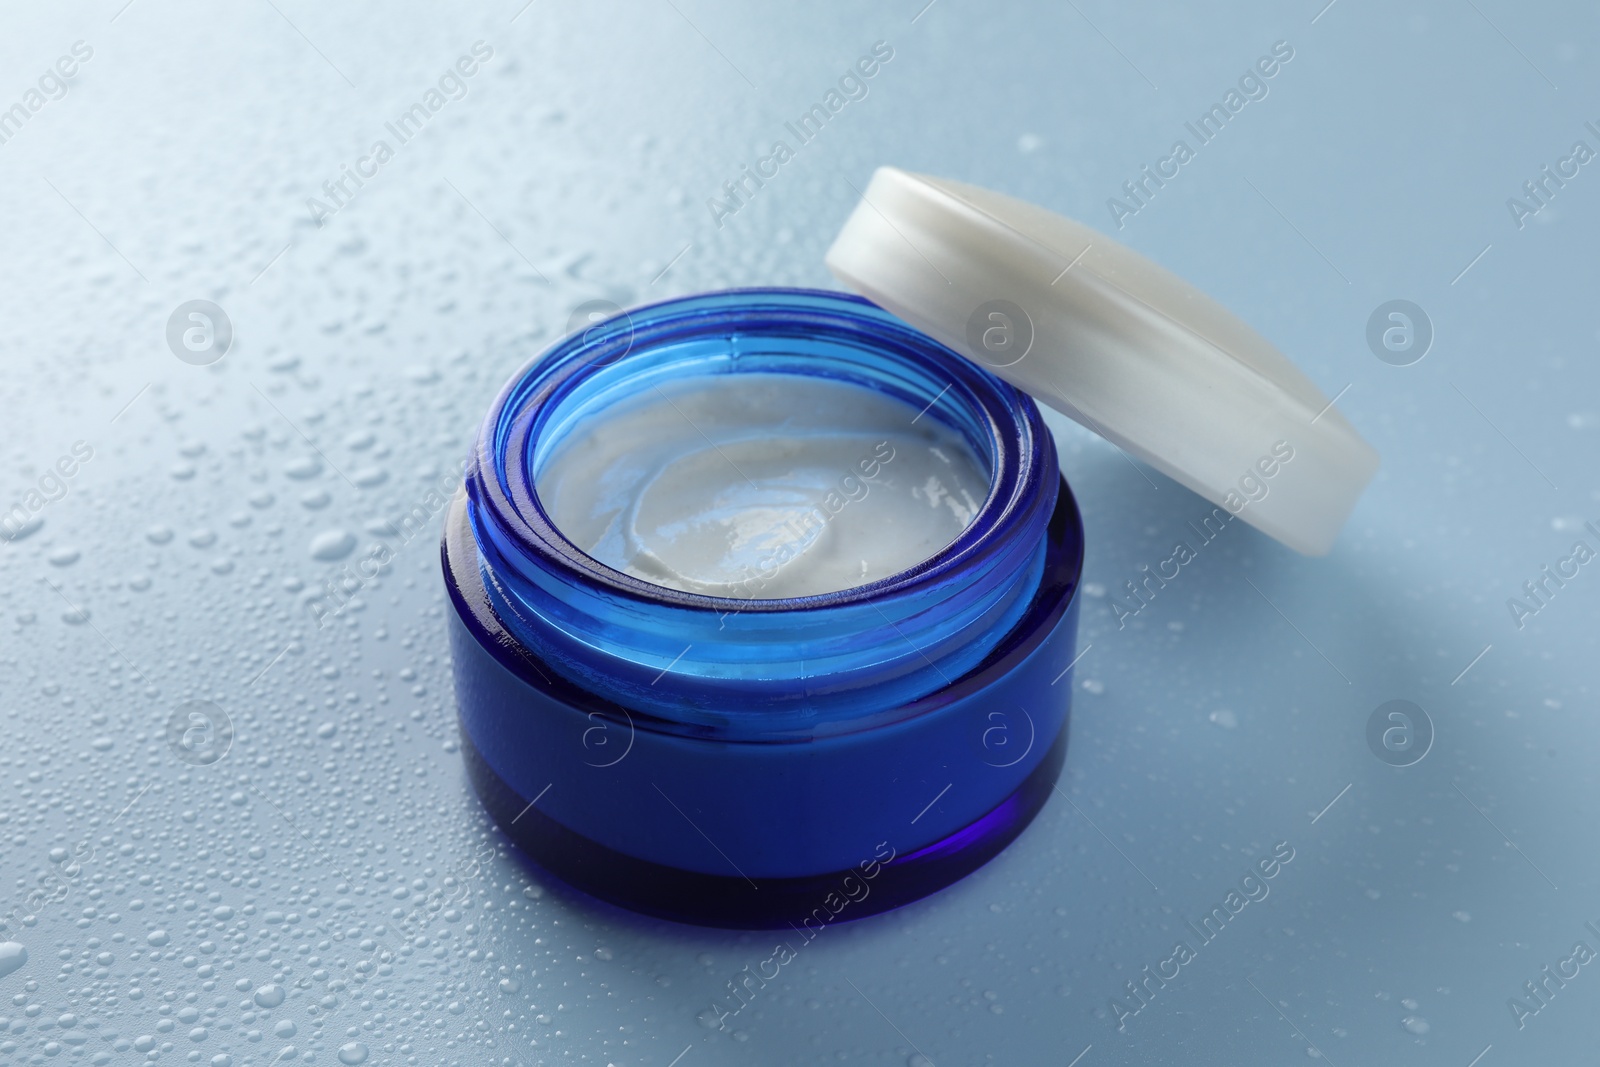 Photo of Moisturizing cream in open jar on light blue background with water drops, closeup